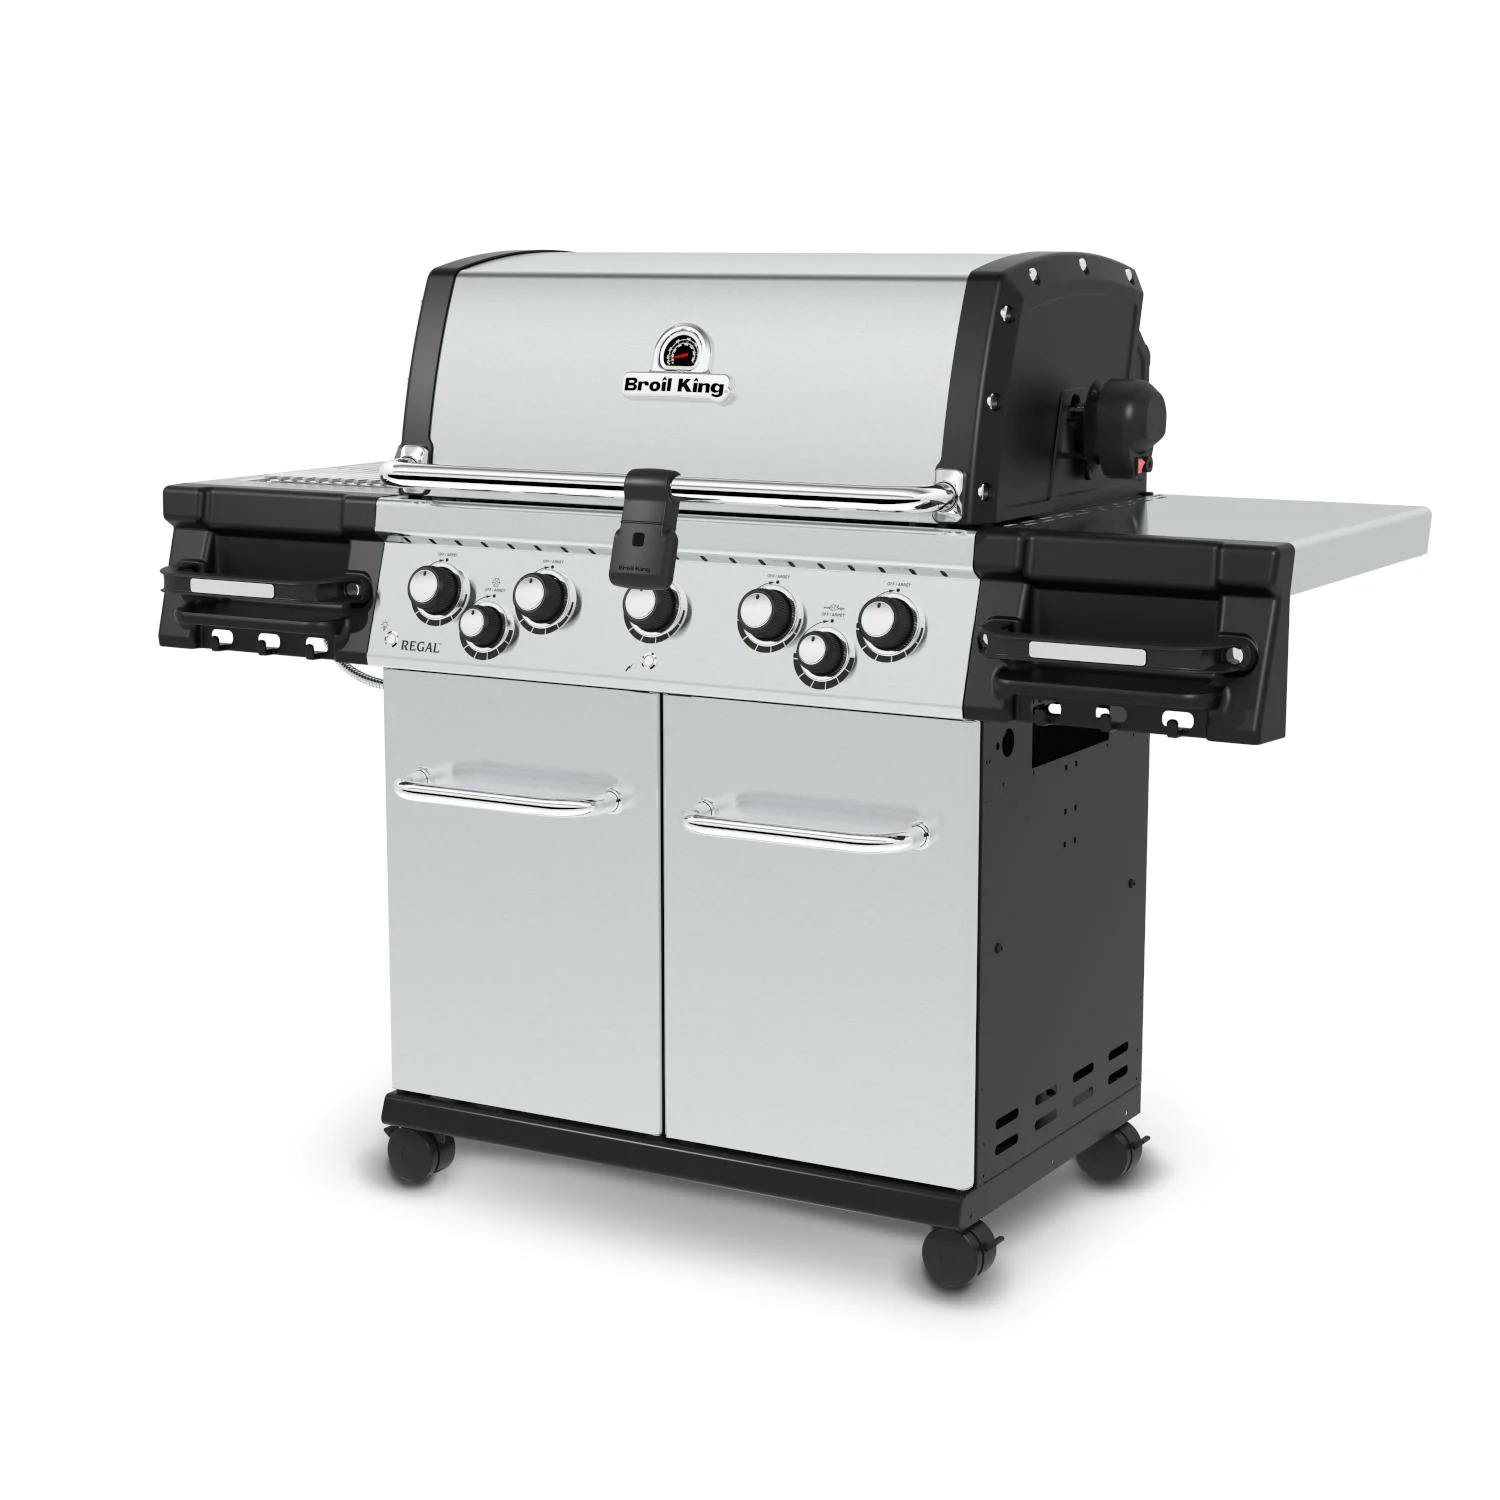 Broil King Regal S 590 Pro IR 5-Burner Gas Grill with Rotisserie and Infrared Side Burner · Propane